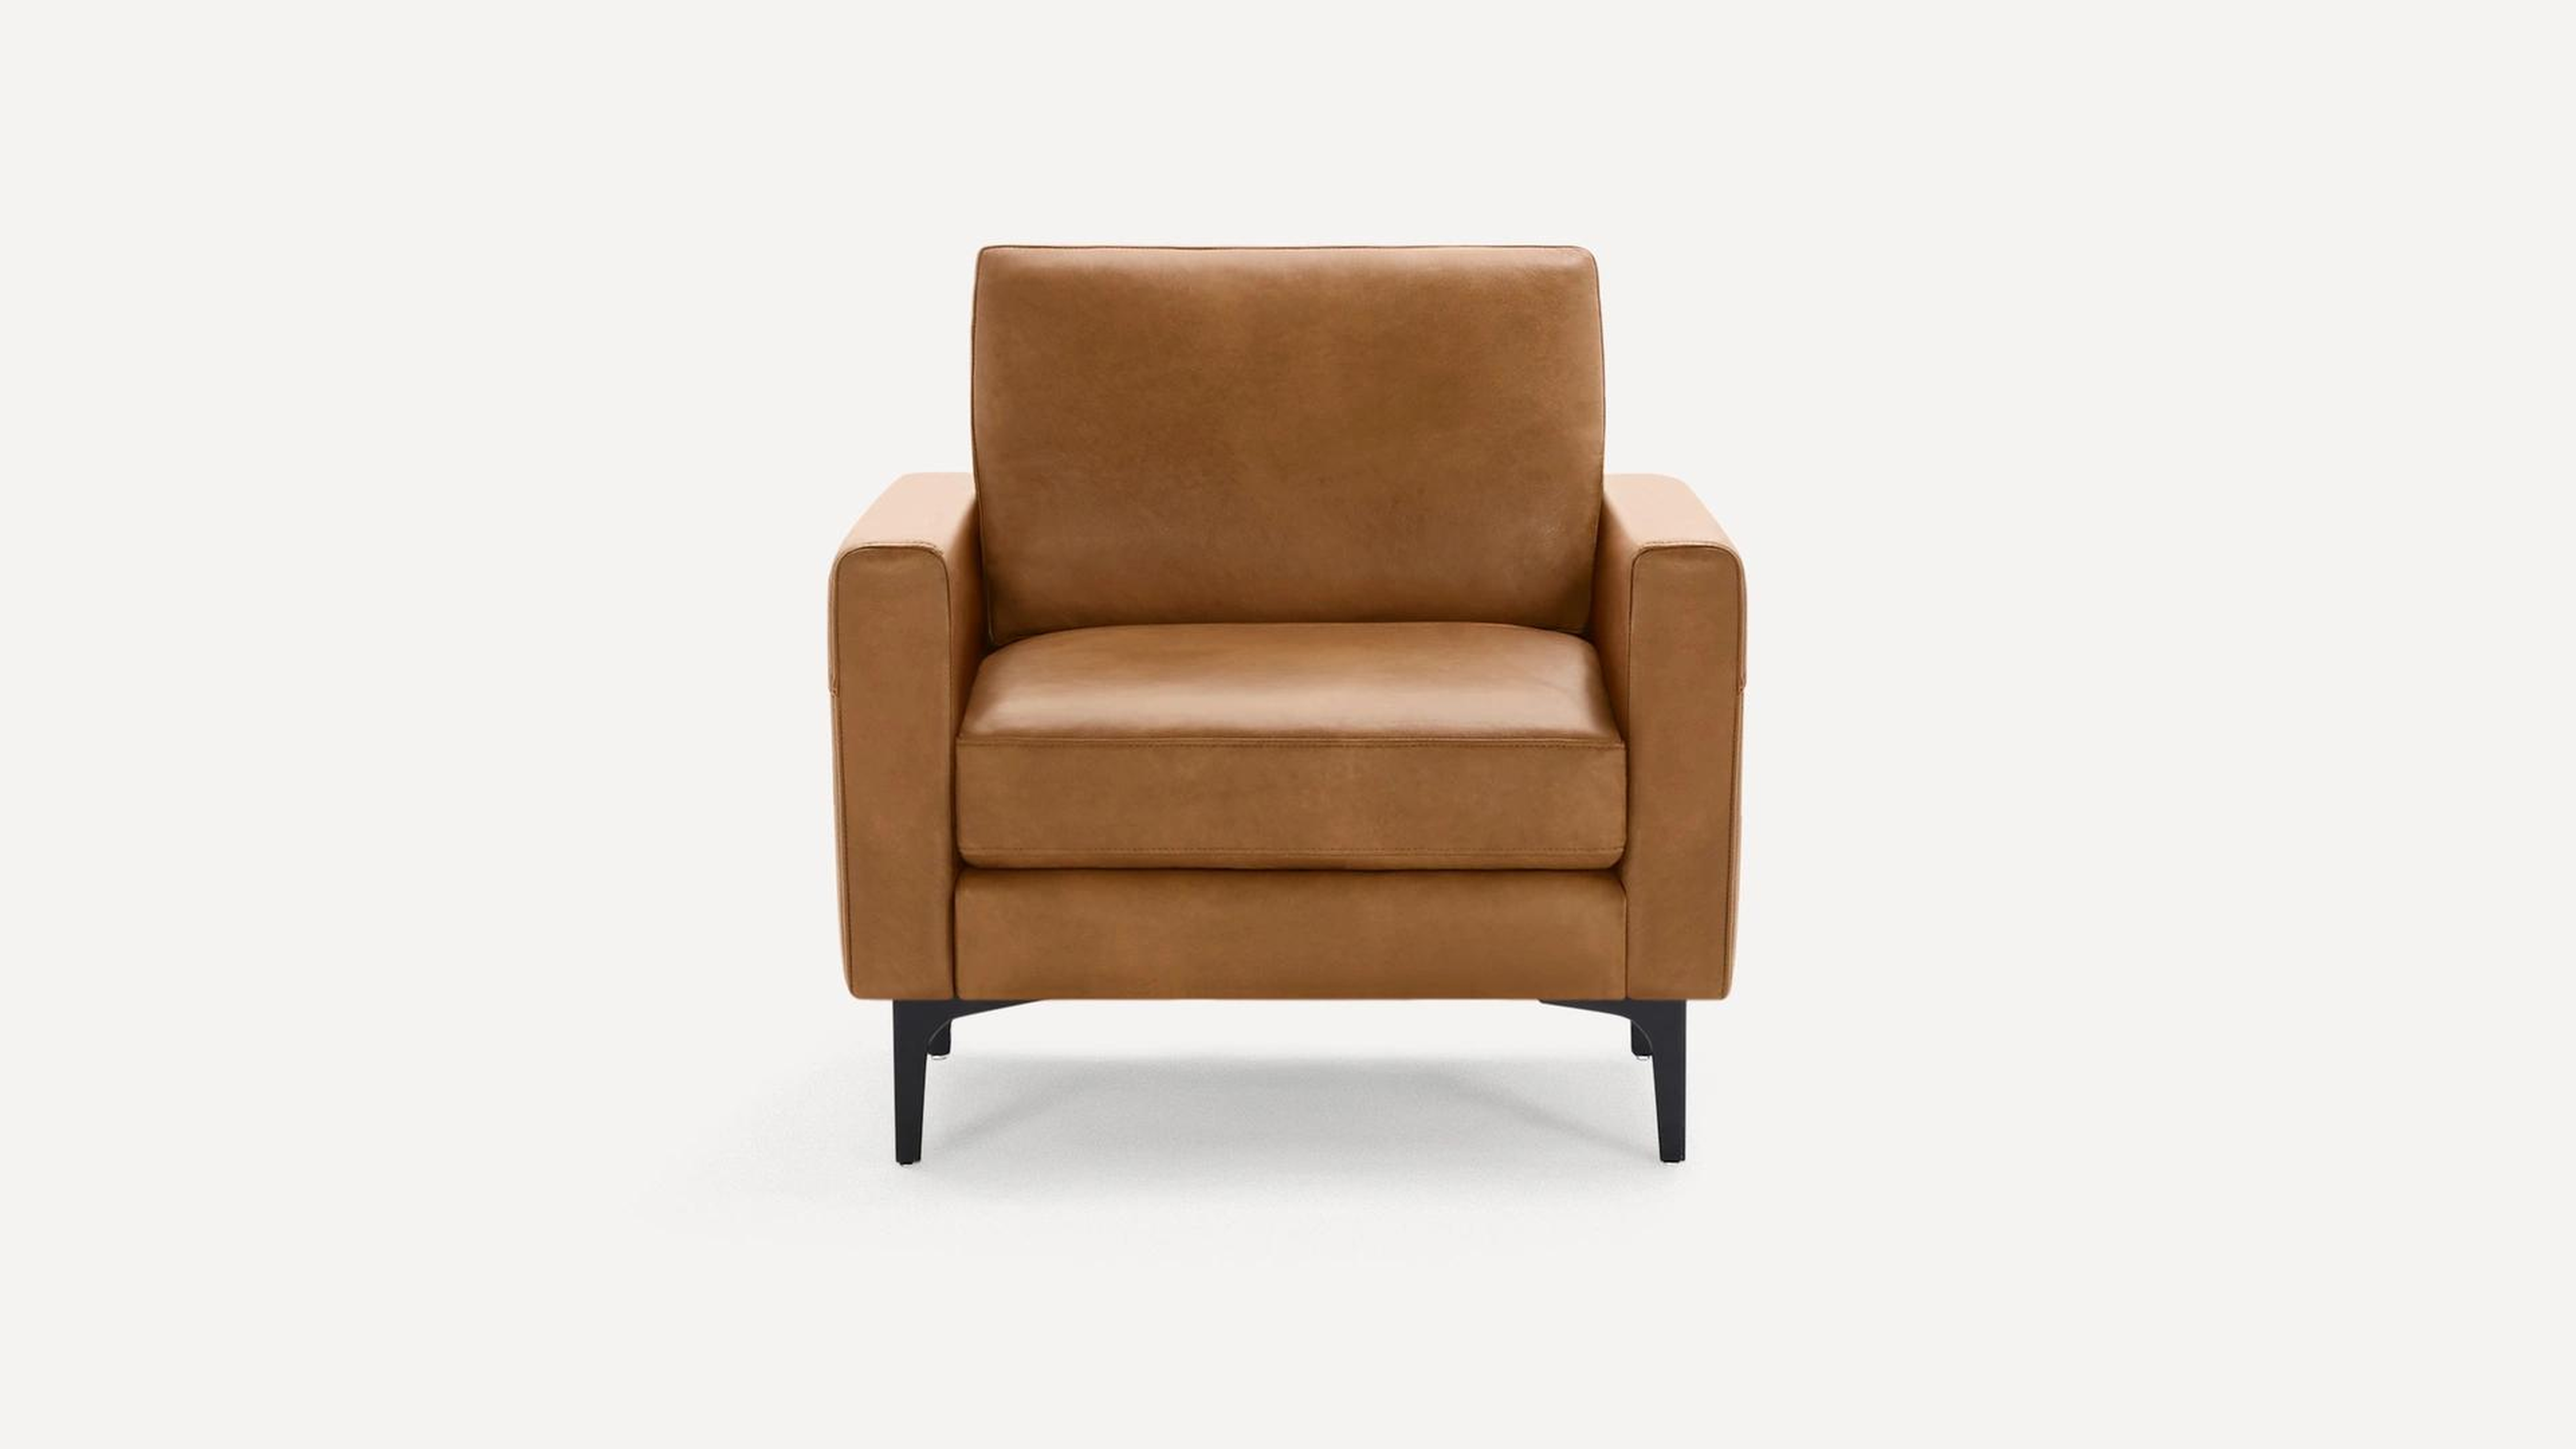 Nomad Leather Club Chair in Camel - Burrow